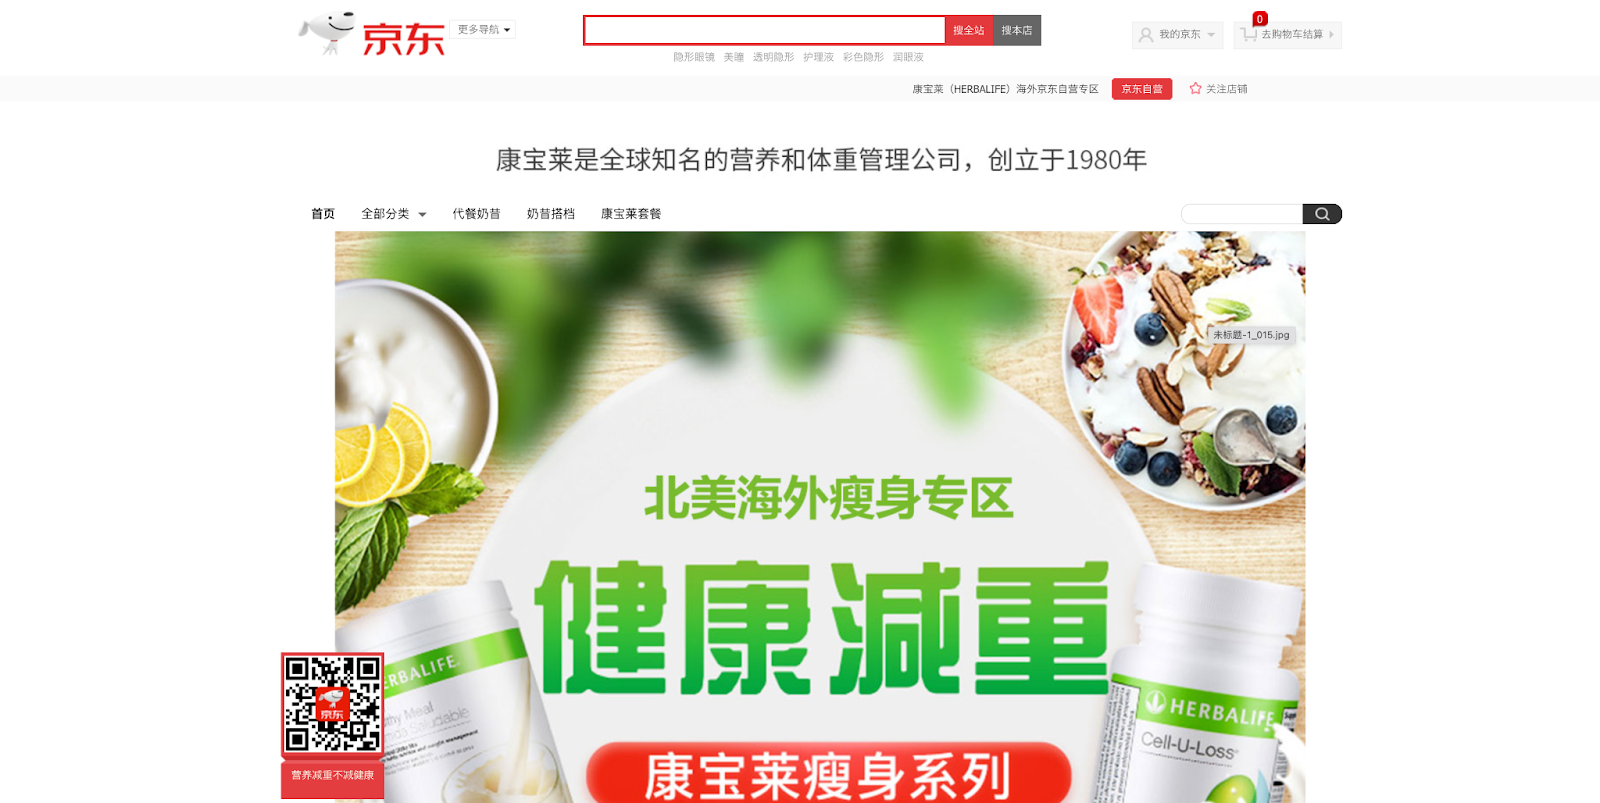 Herbalife’s "Self-Operated Section" on JD.com